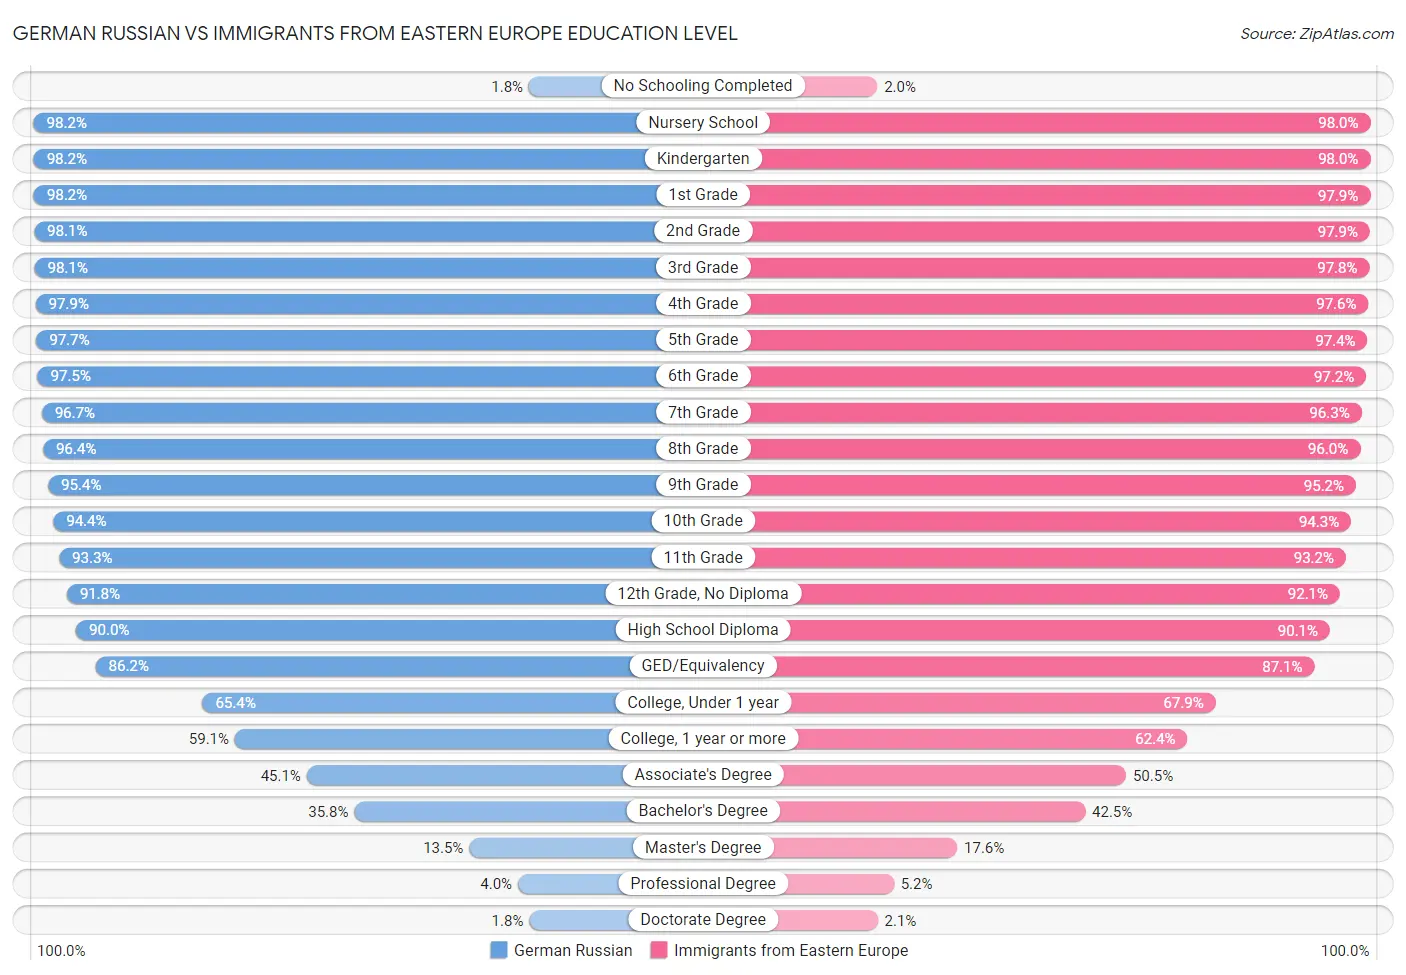 German Russian vs Immigrants from Eastern Europe Education Level